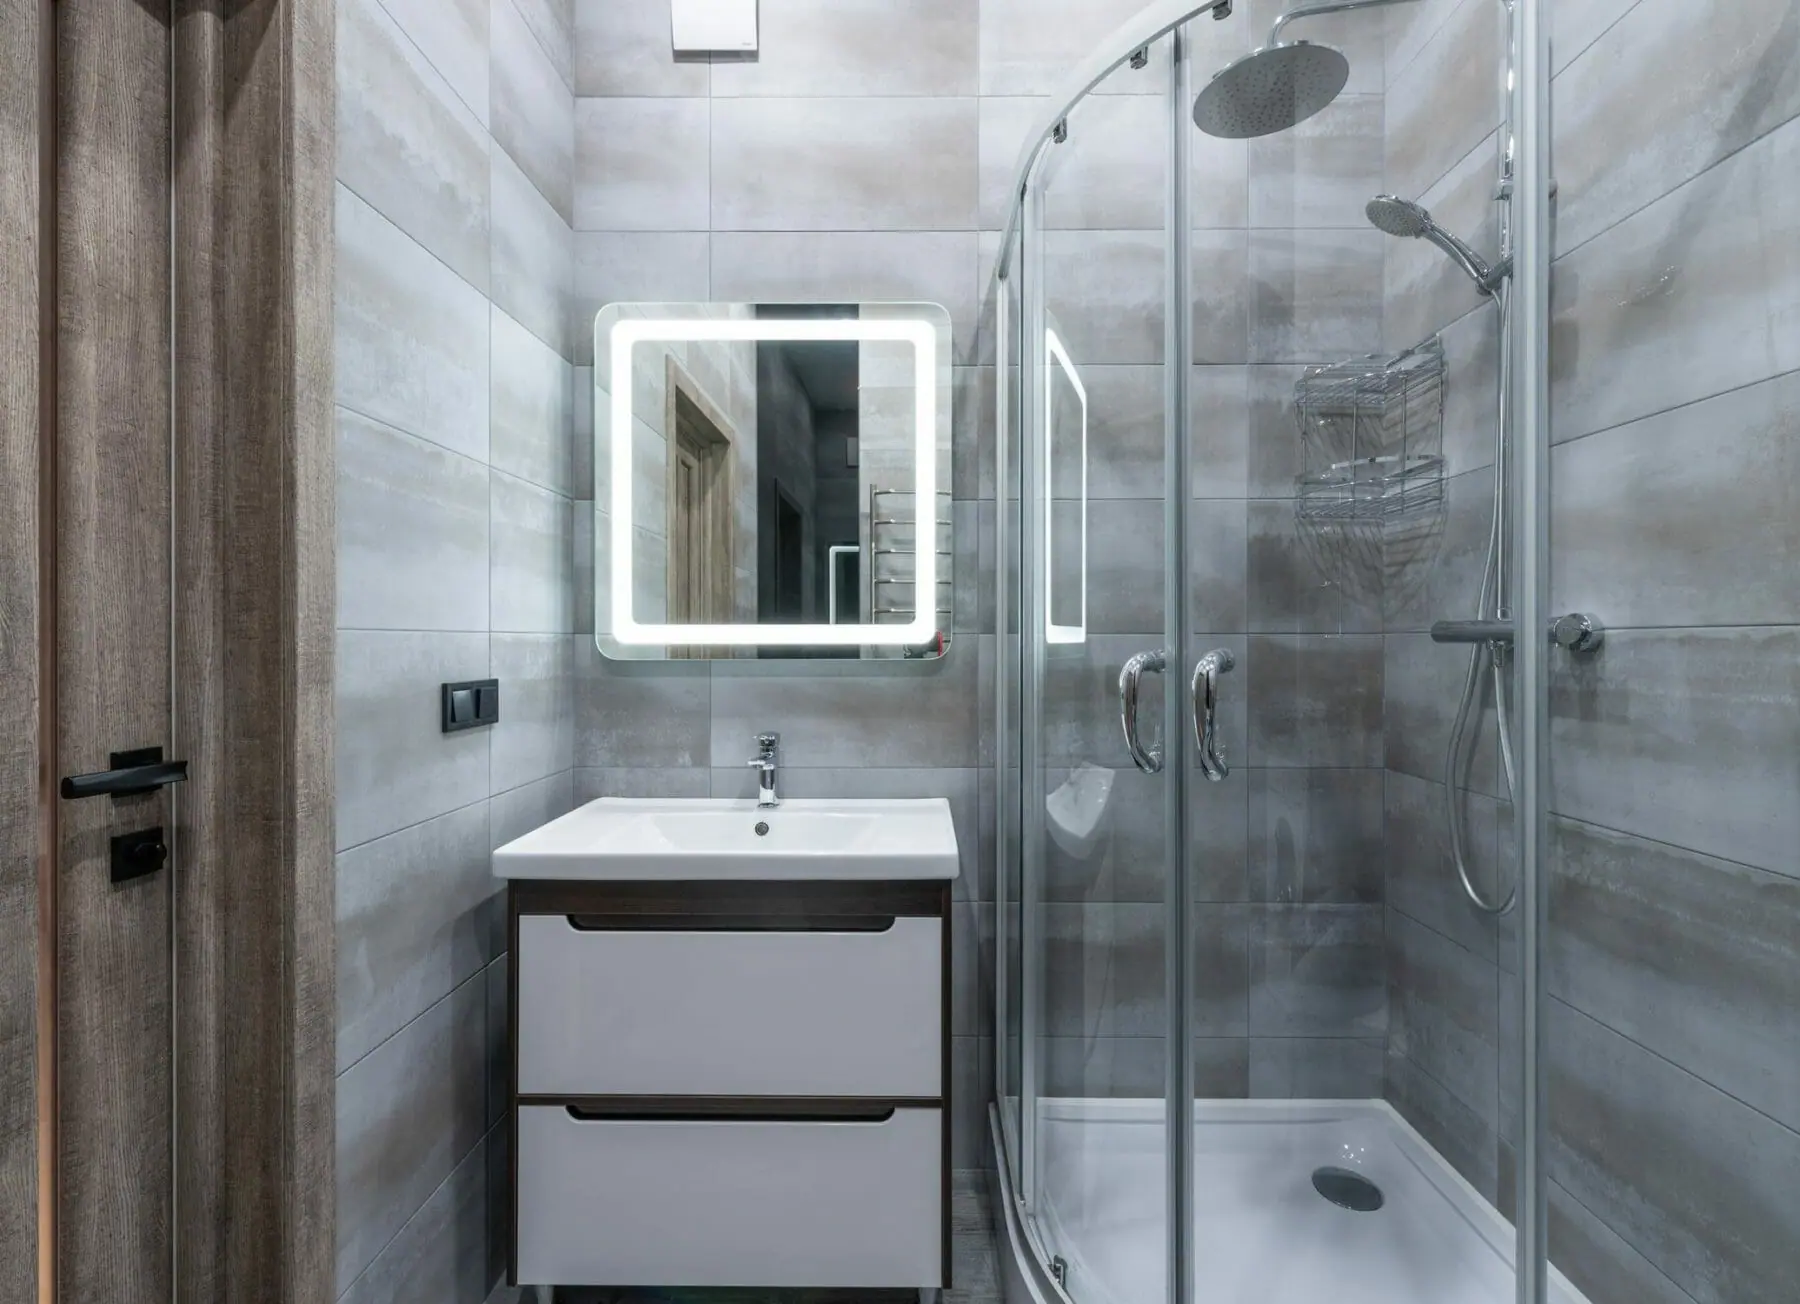 How to Clean Glass Shower Doors LIKE A PRO + Remove Hard Water